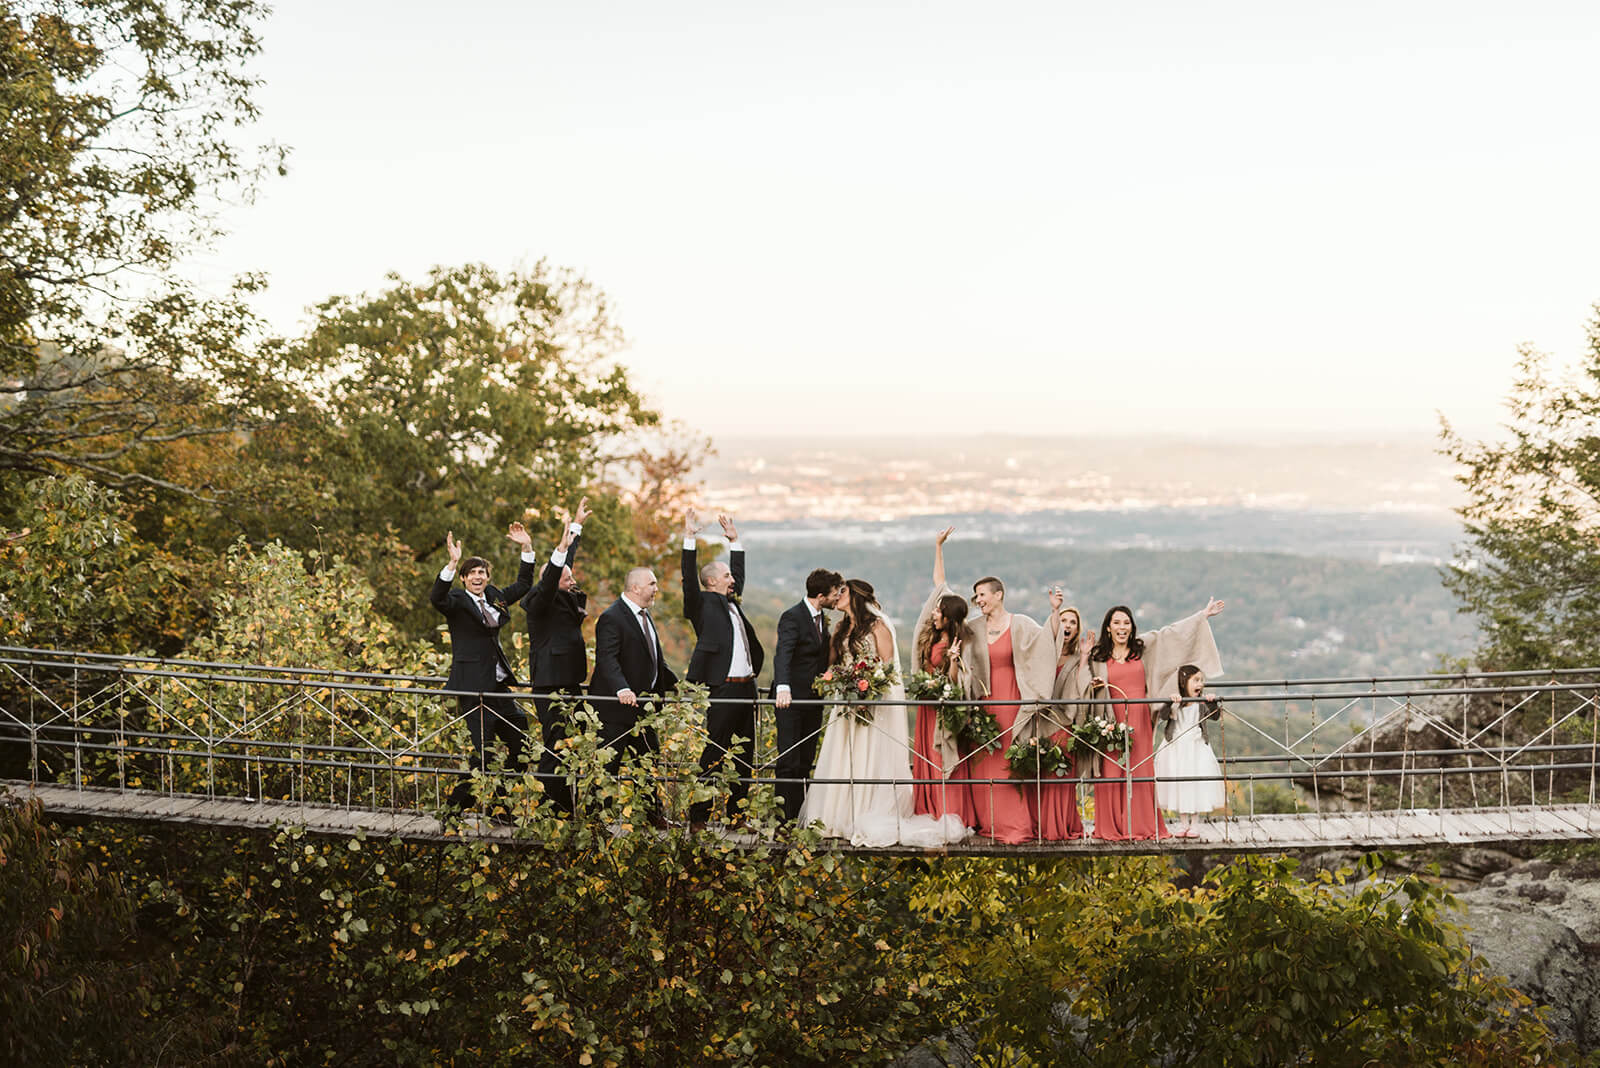 A bridal party celebrates as the bride and groom kiss on a suspension bridge.